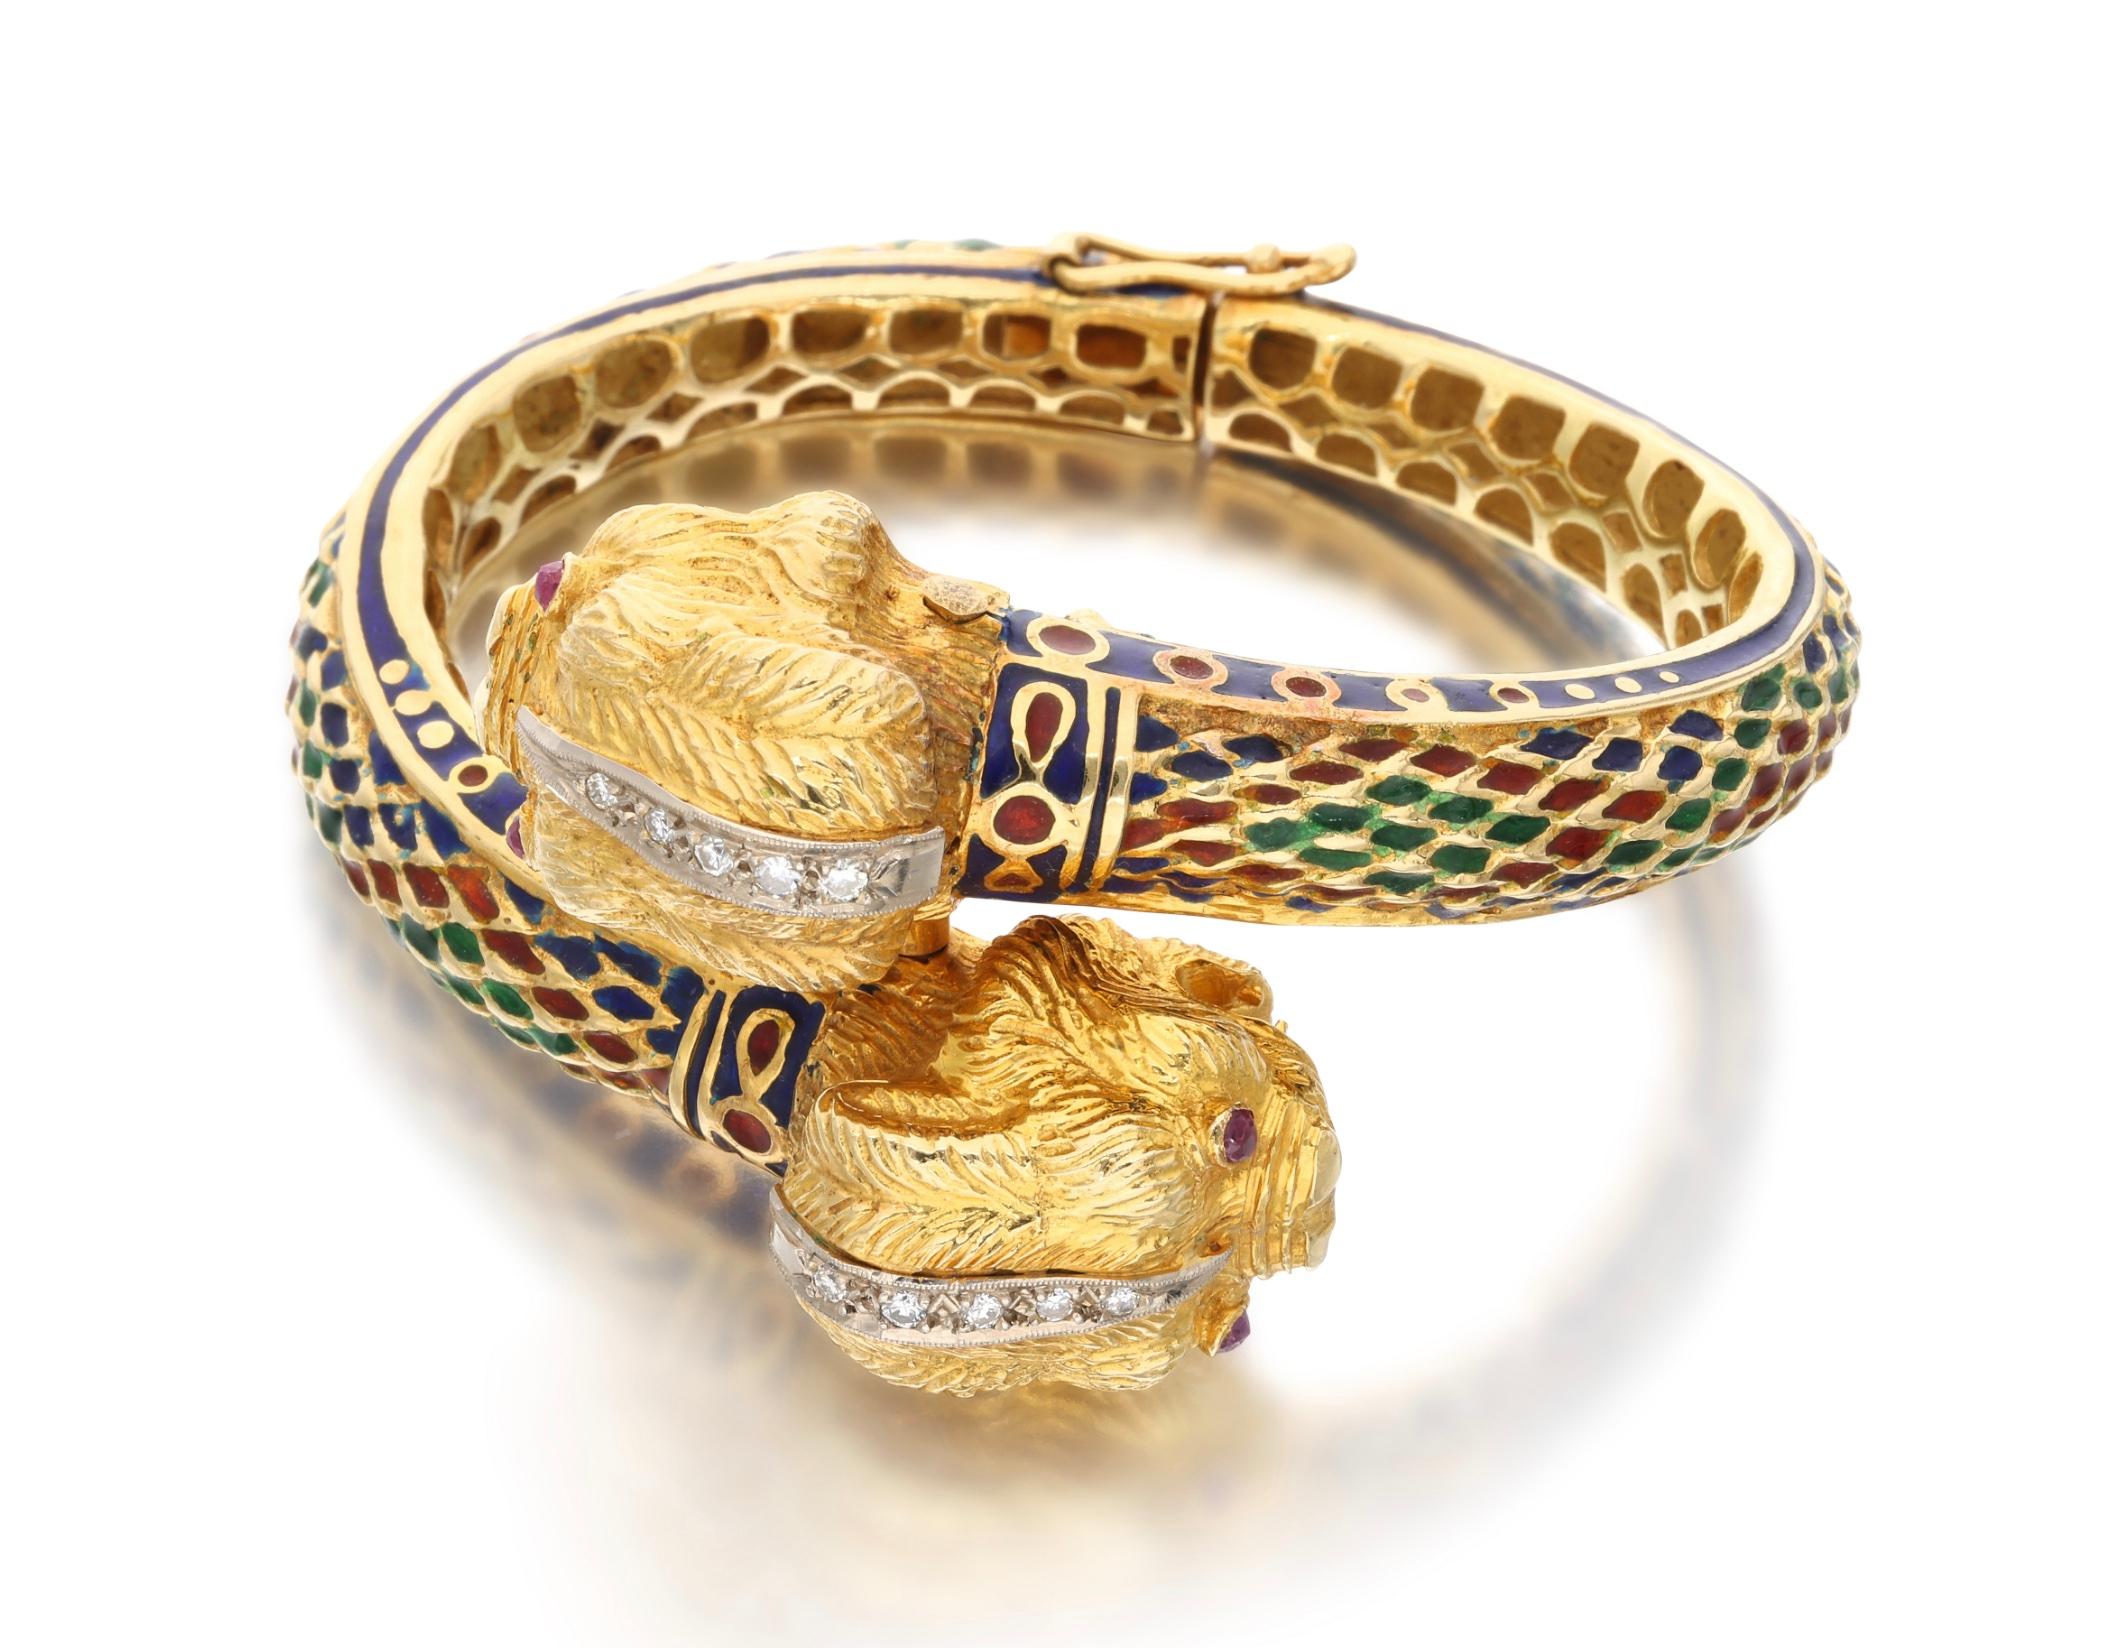 An 18 karat yellow gold bangle bracelet, featuring a two-headed chimera that has eyes made out of rubies. The chimera's head is lined with round-cut diamonds weighing a total of approximately 0.20 carat. Its body is accented by enamel. Made in